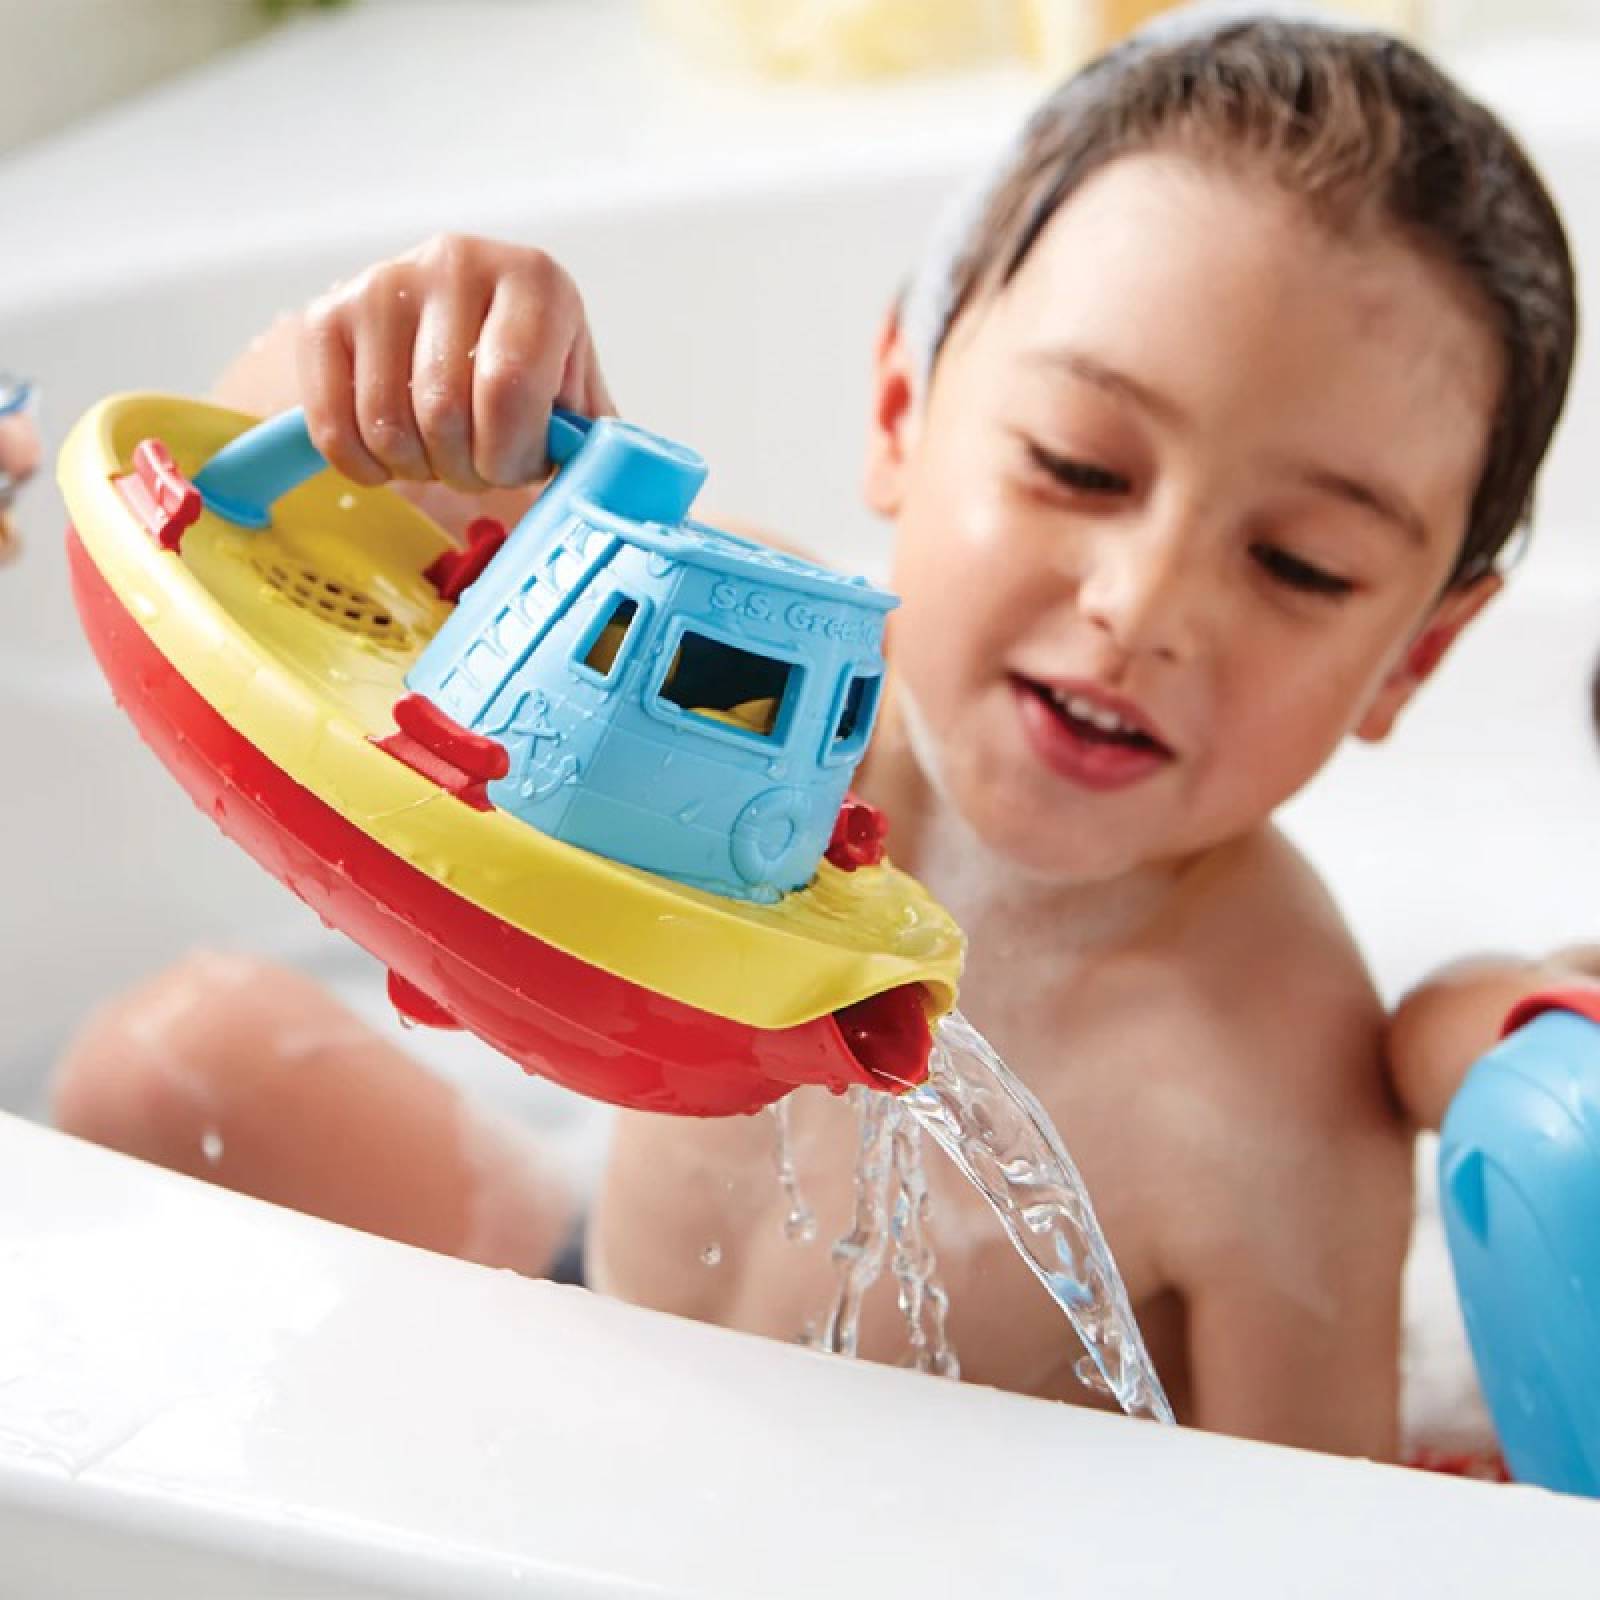 Blue Top Pouring Tug Boat By Green Toys 6m+ thumbnails